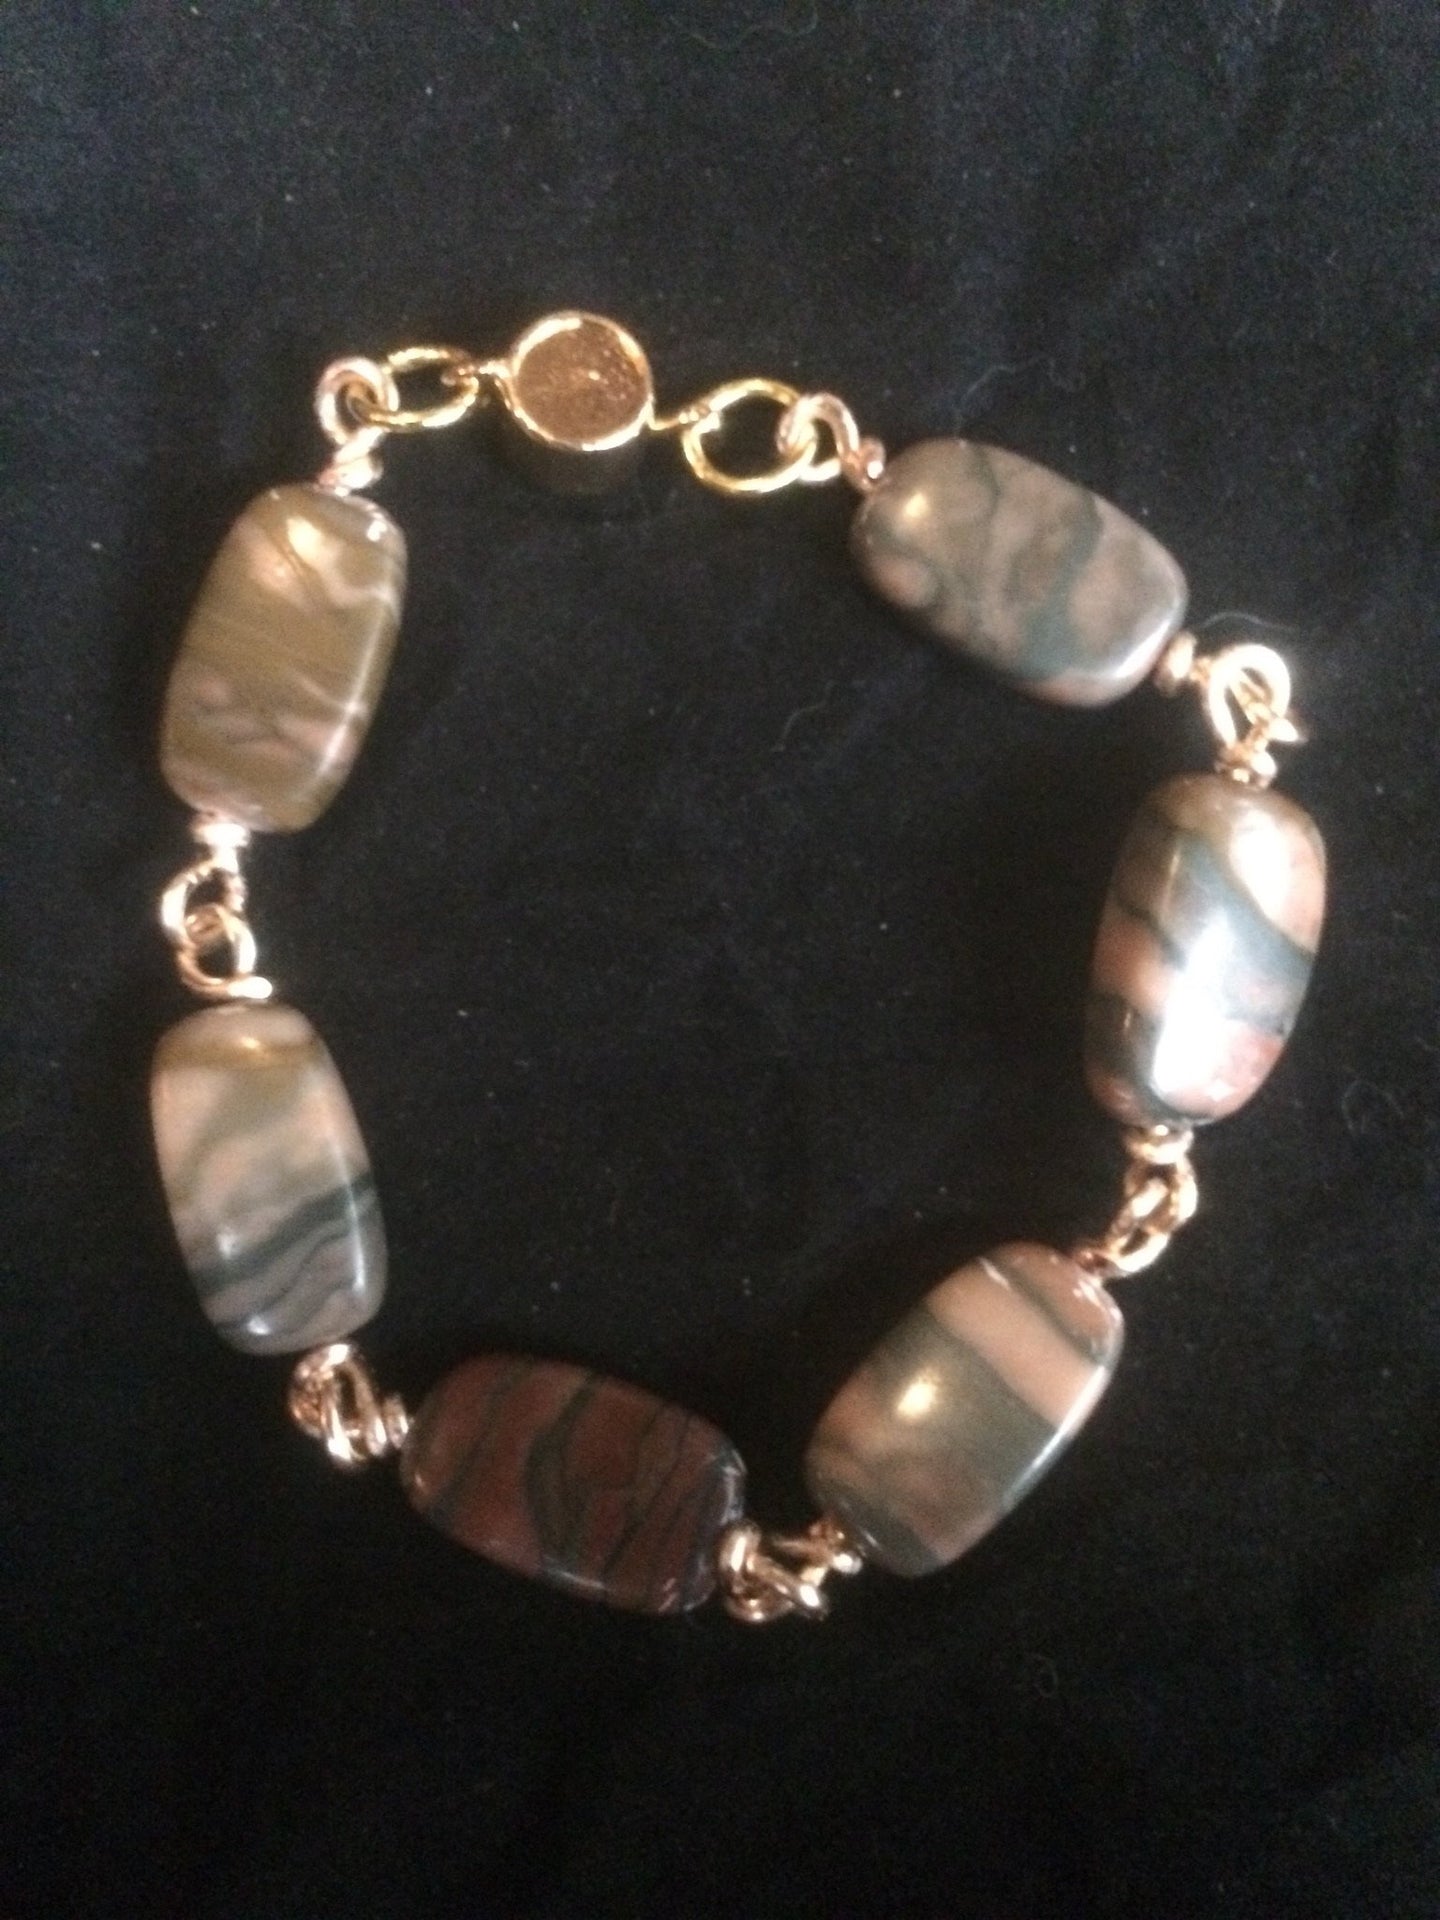 Six 20x11mm rectangular agate beads are connected with hand-wrapped plated copper wire to make this 7.5